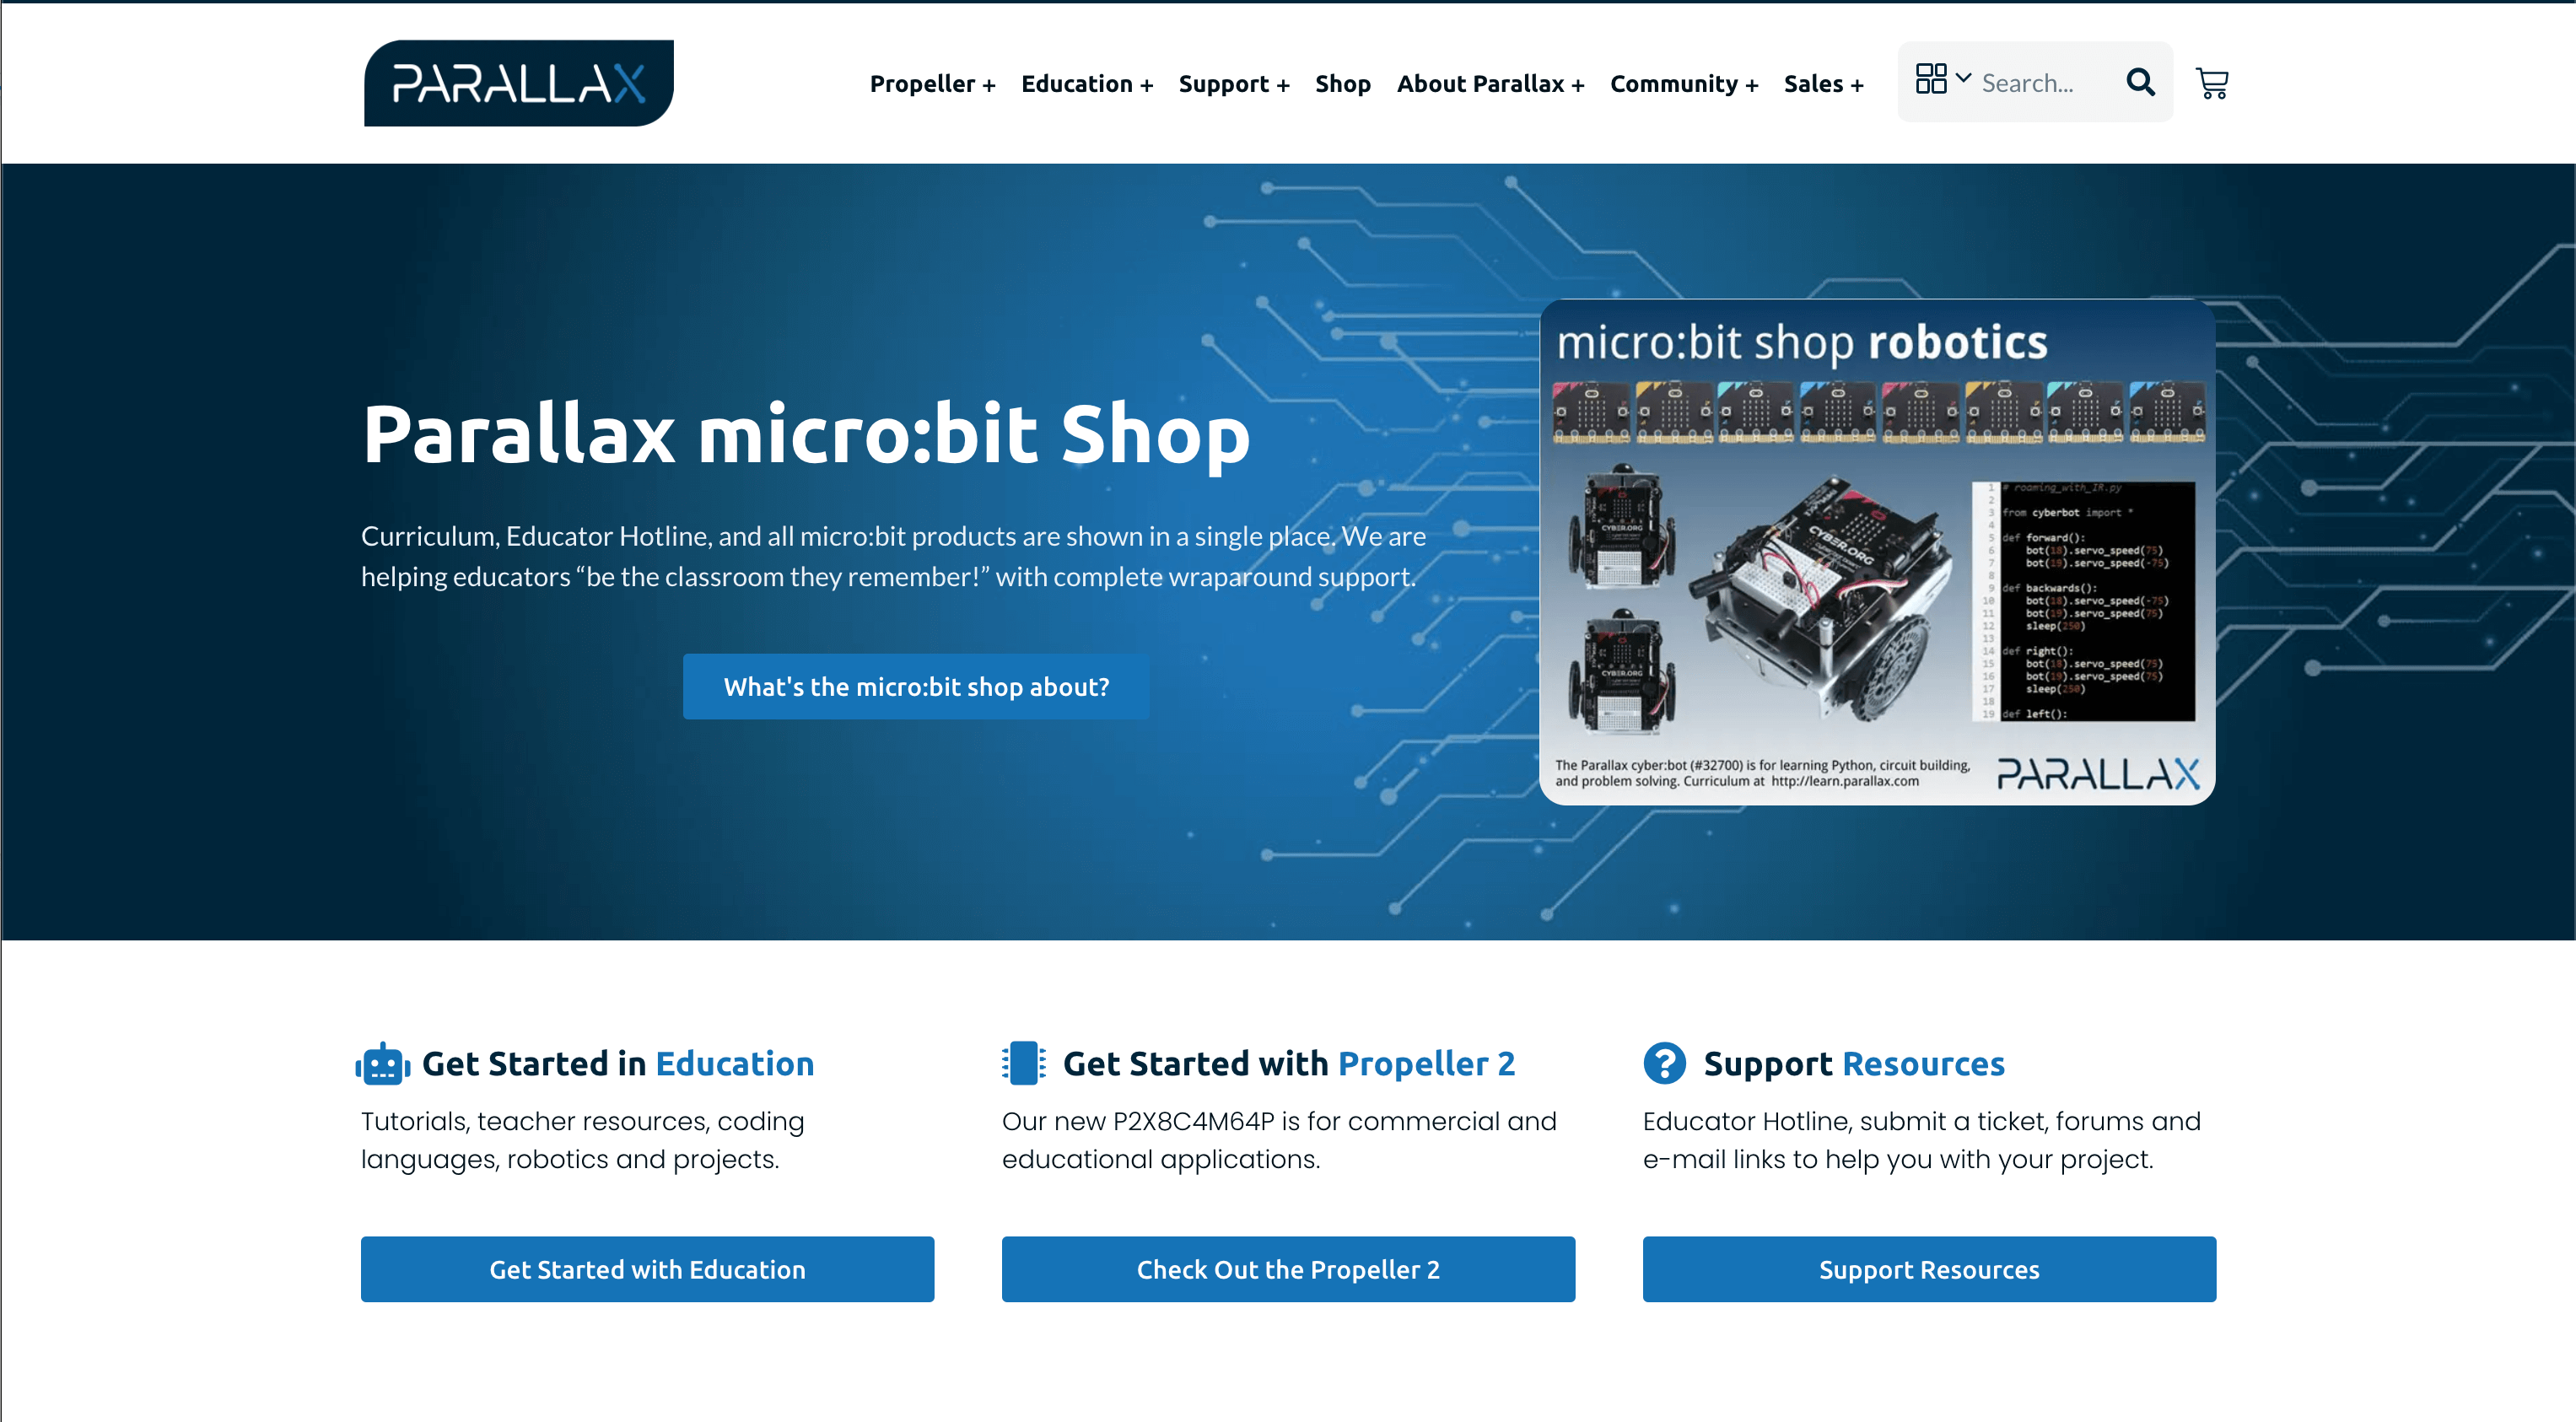 Parallax's homepage